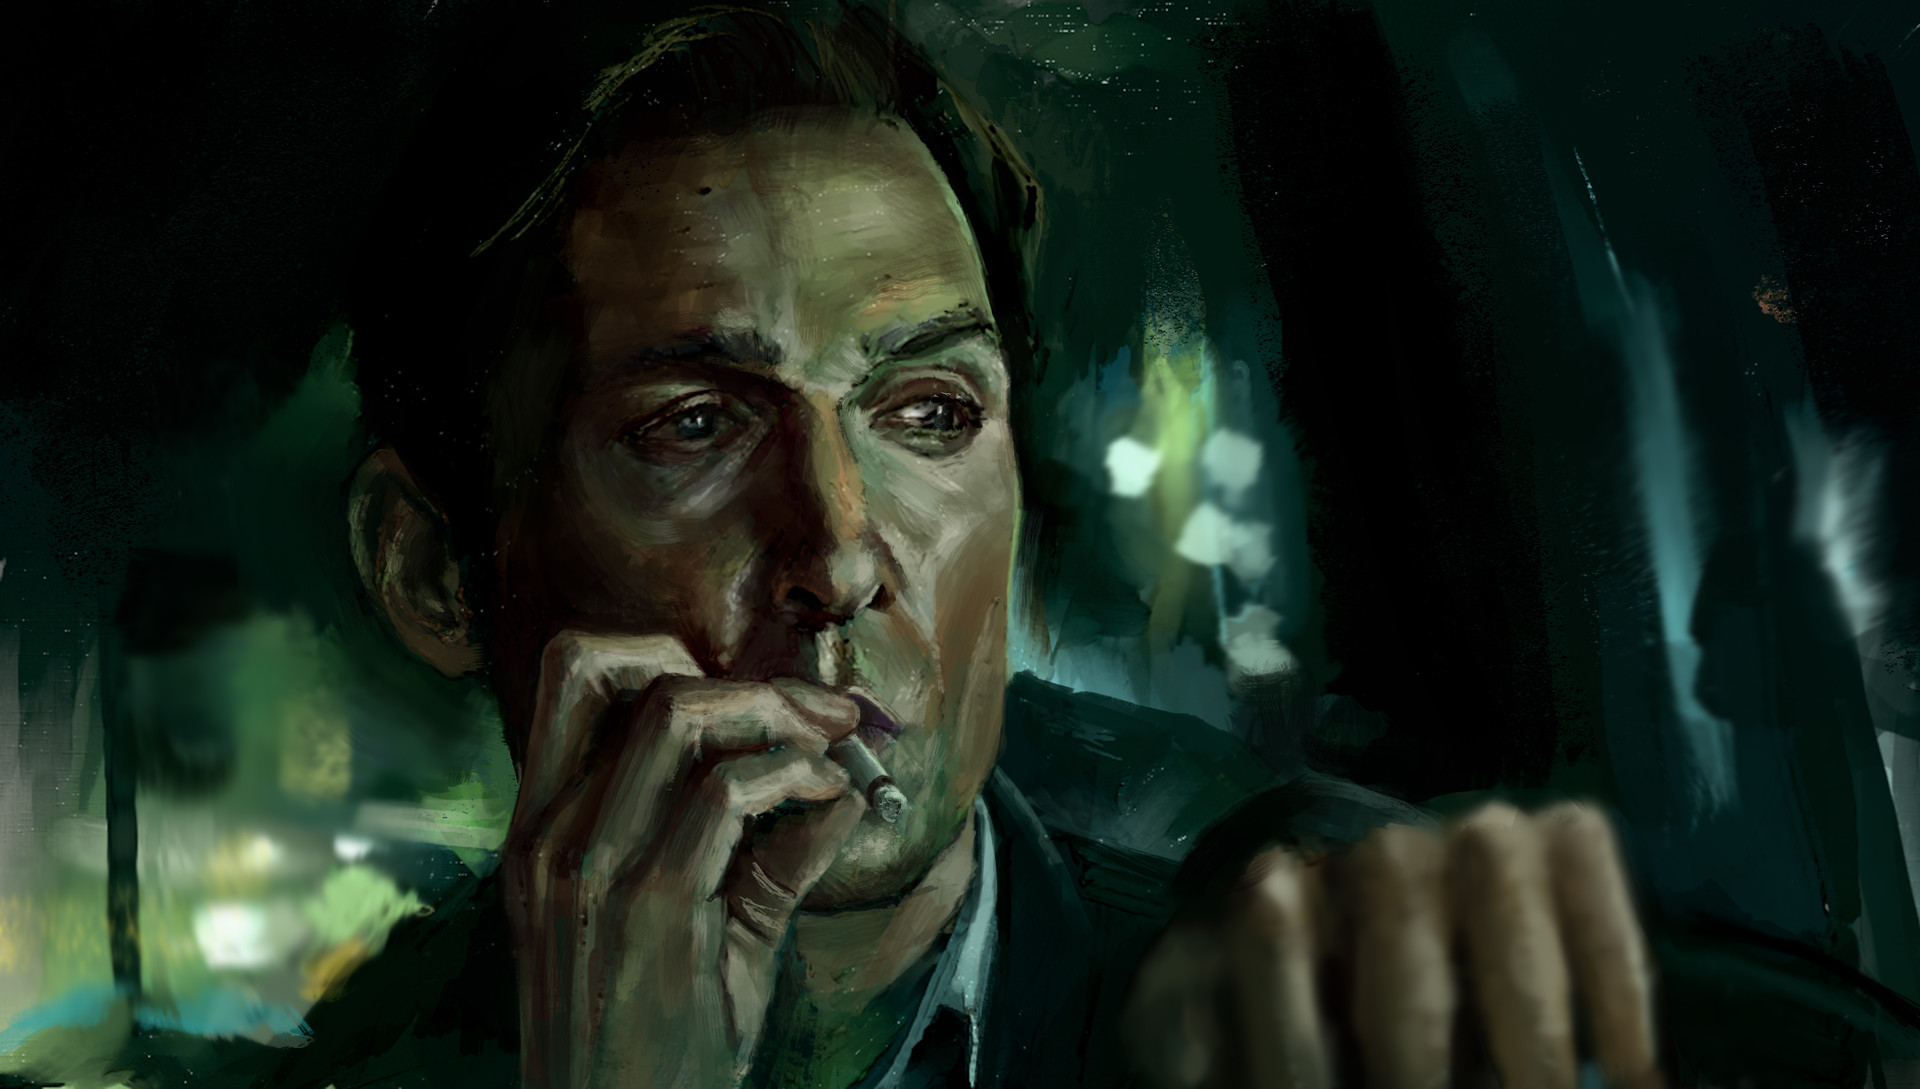 Rust cohle and marty фото 106